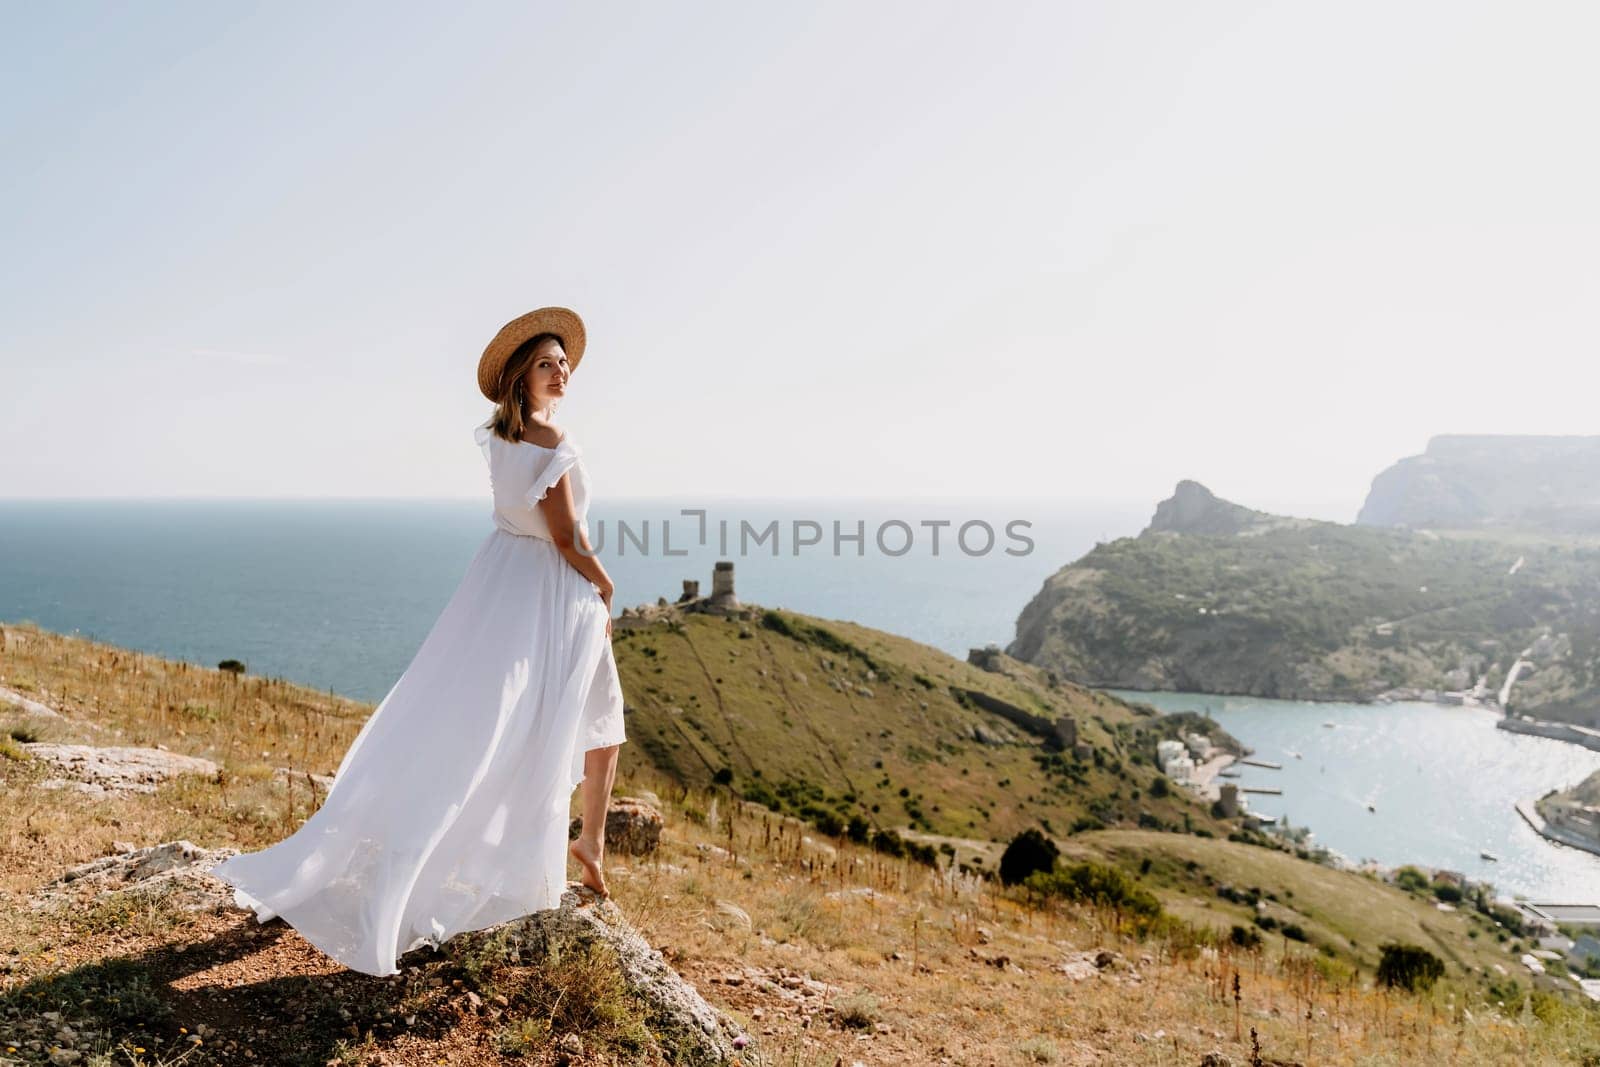 Happy woman in a white dress and hat stands on a rocky cliff above the sea, with the beautiful silhouette of hills in thick fog in the background